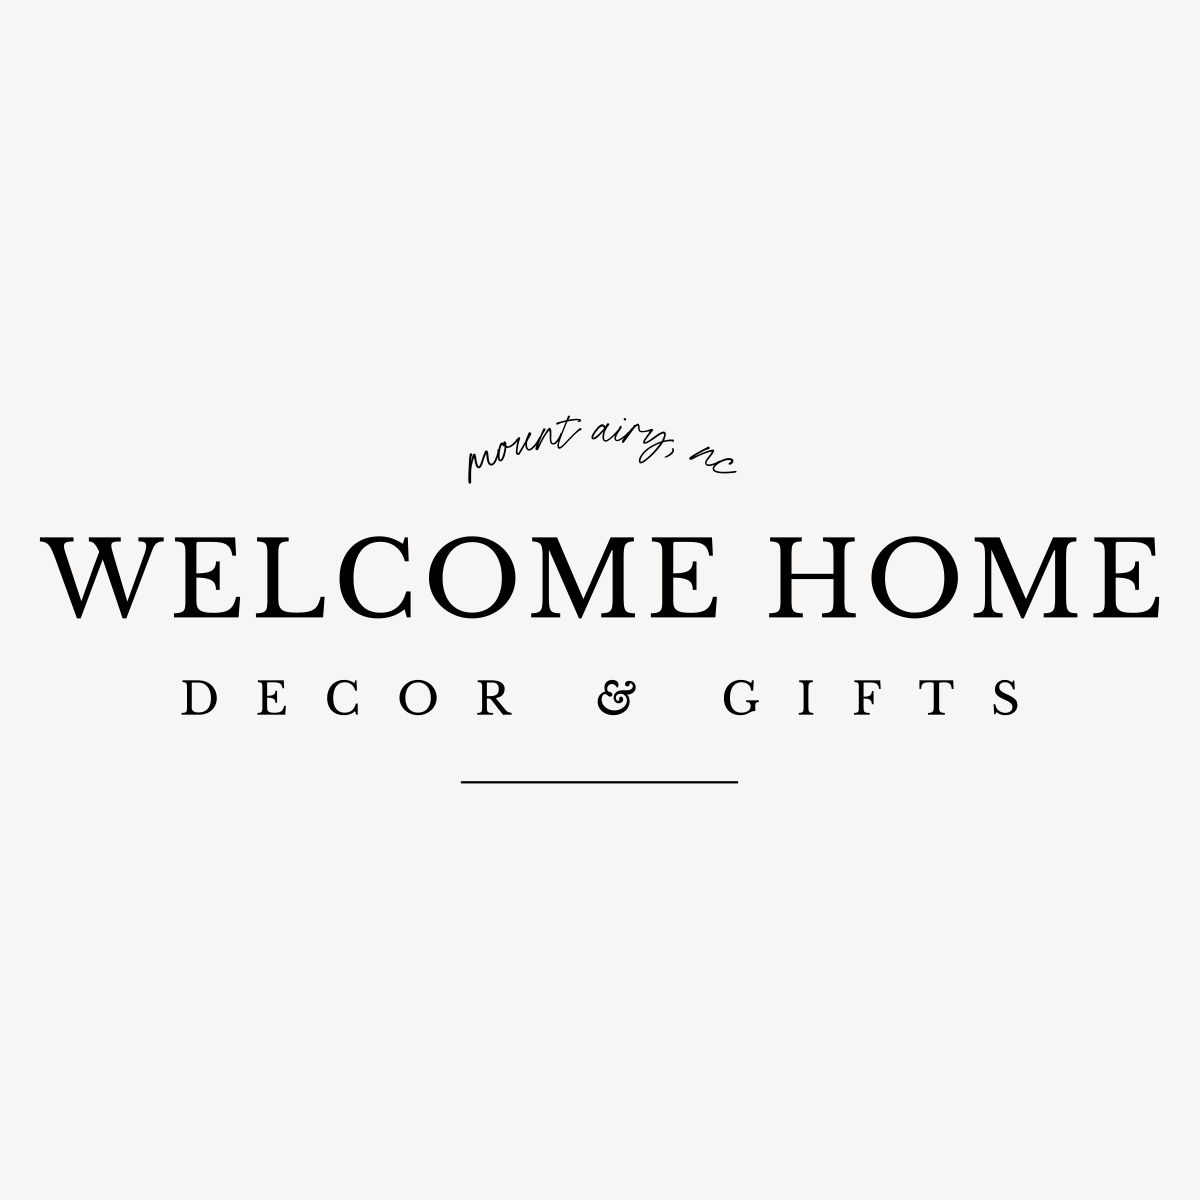 Welcome Home Decor - Mount Airy, NC